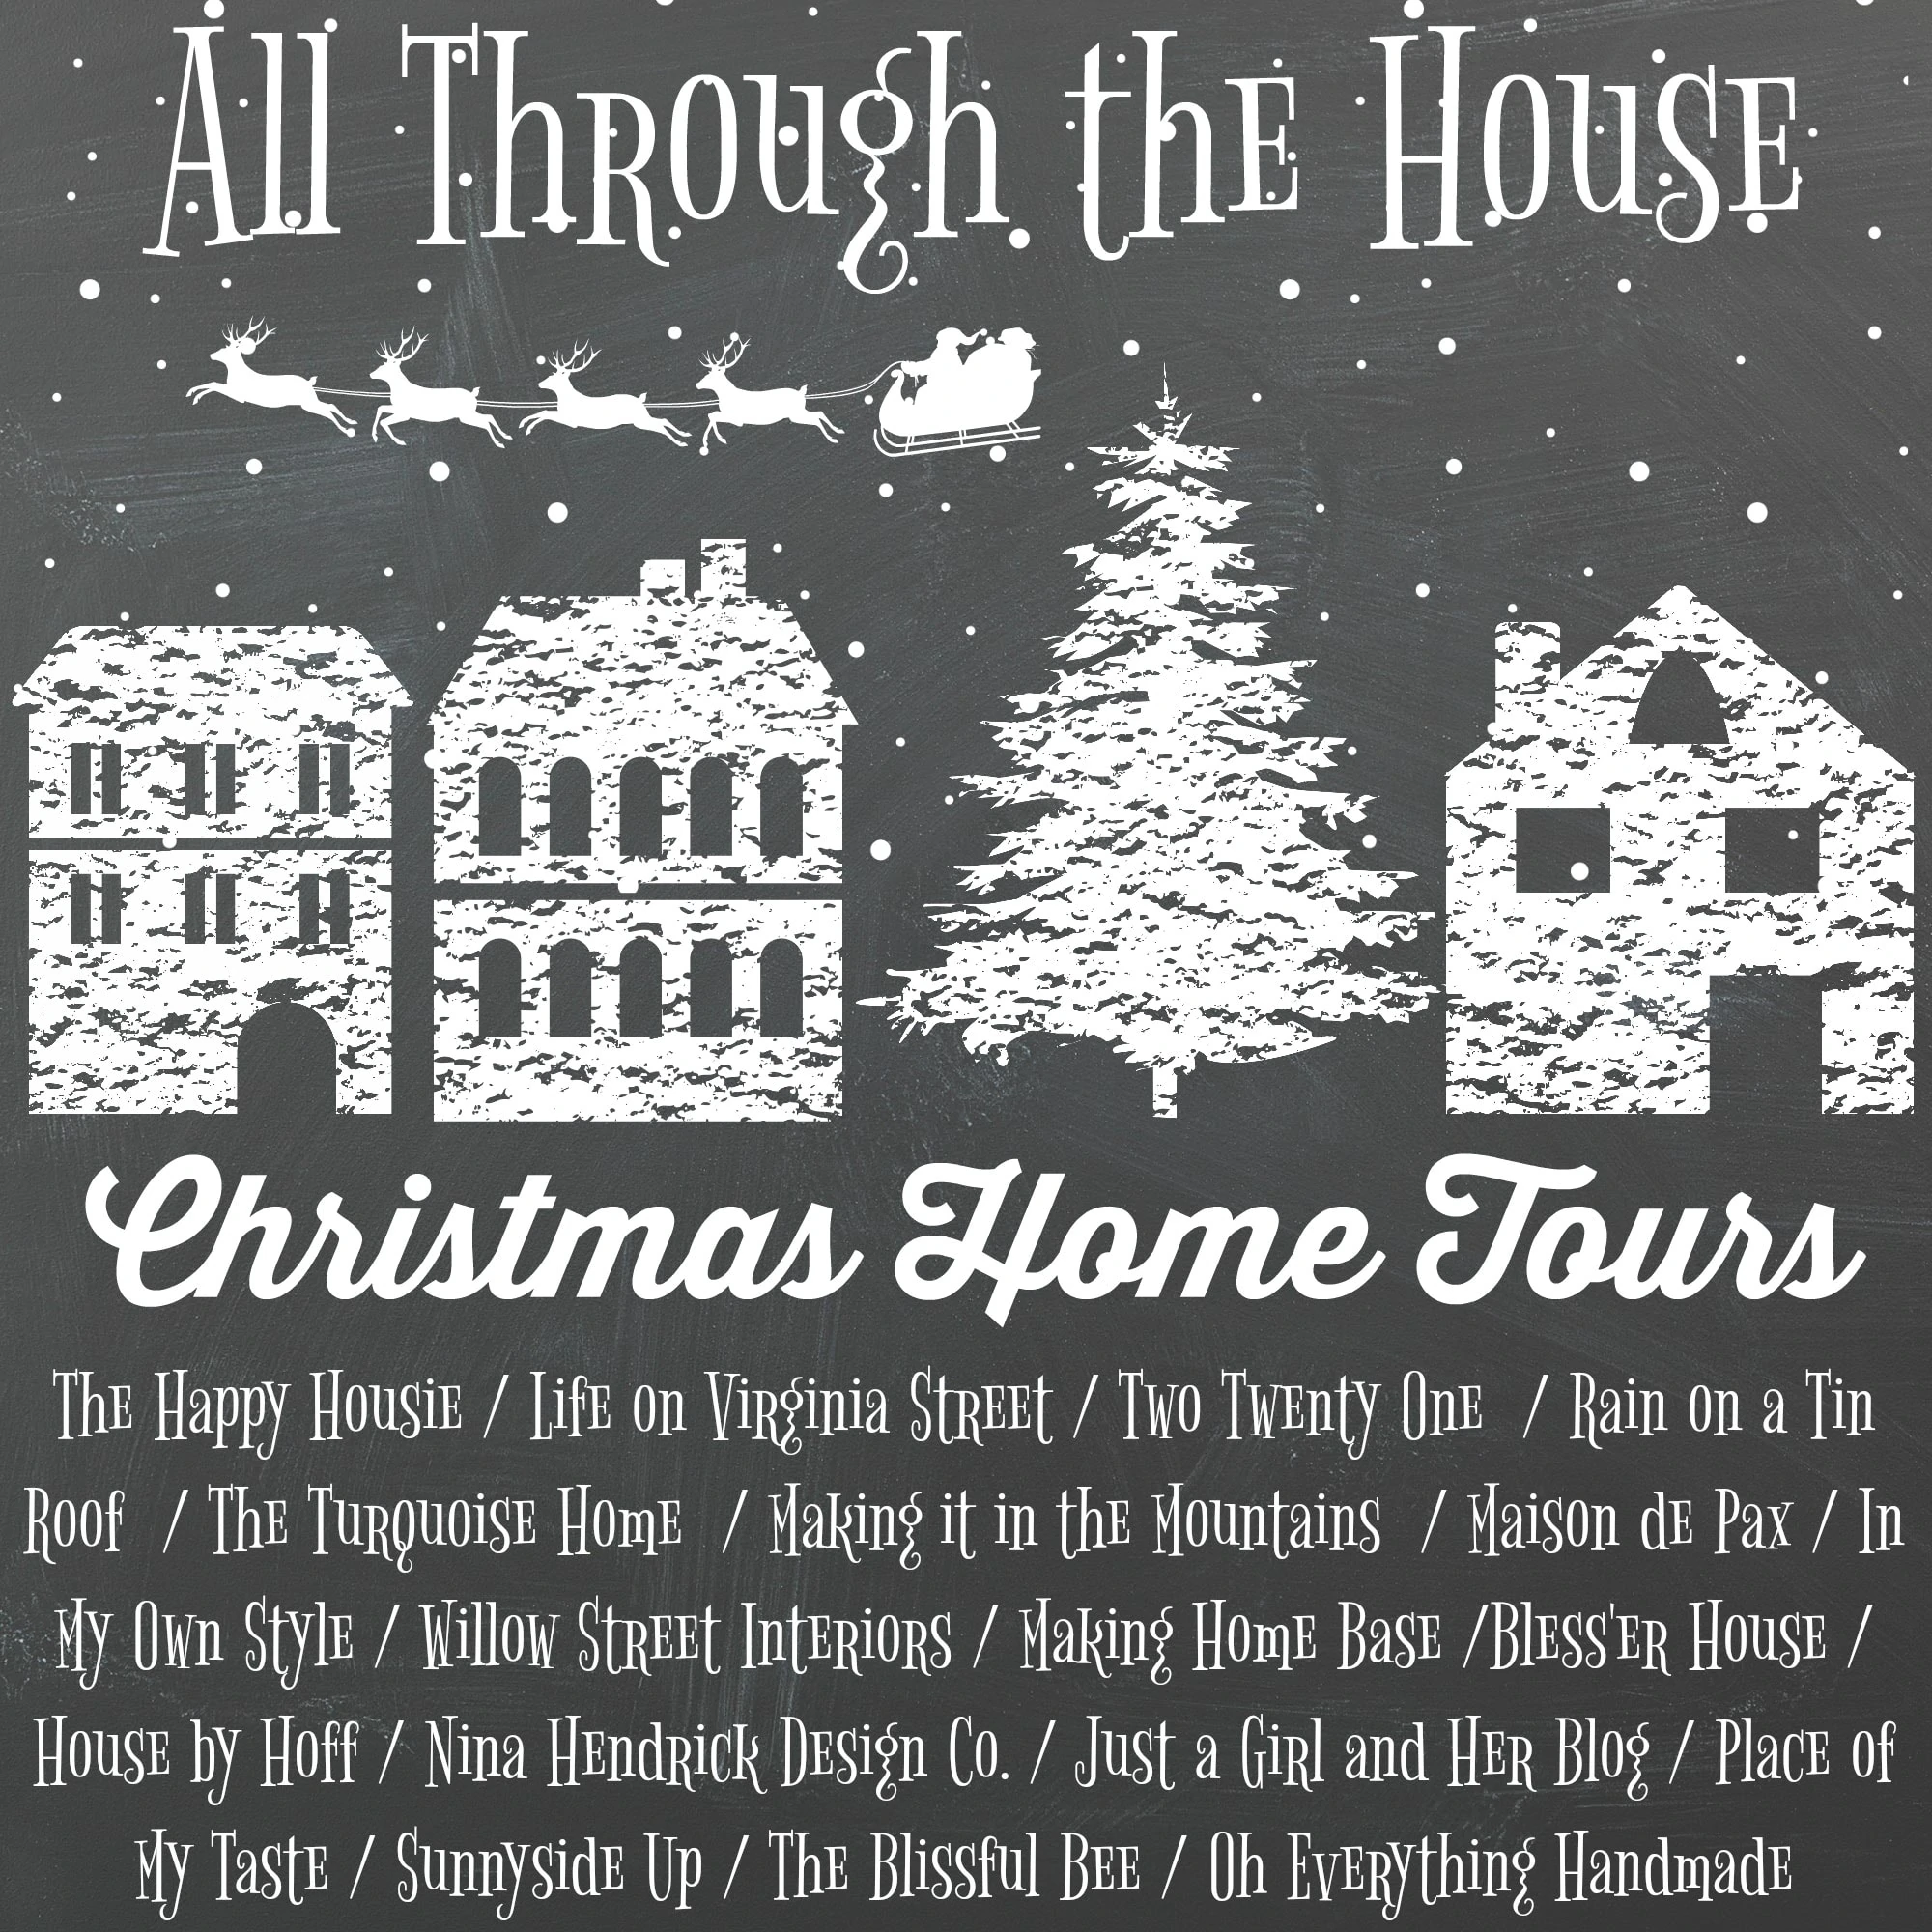 Sign for All Through the House Christmas Home tours. 